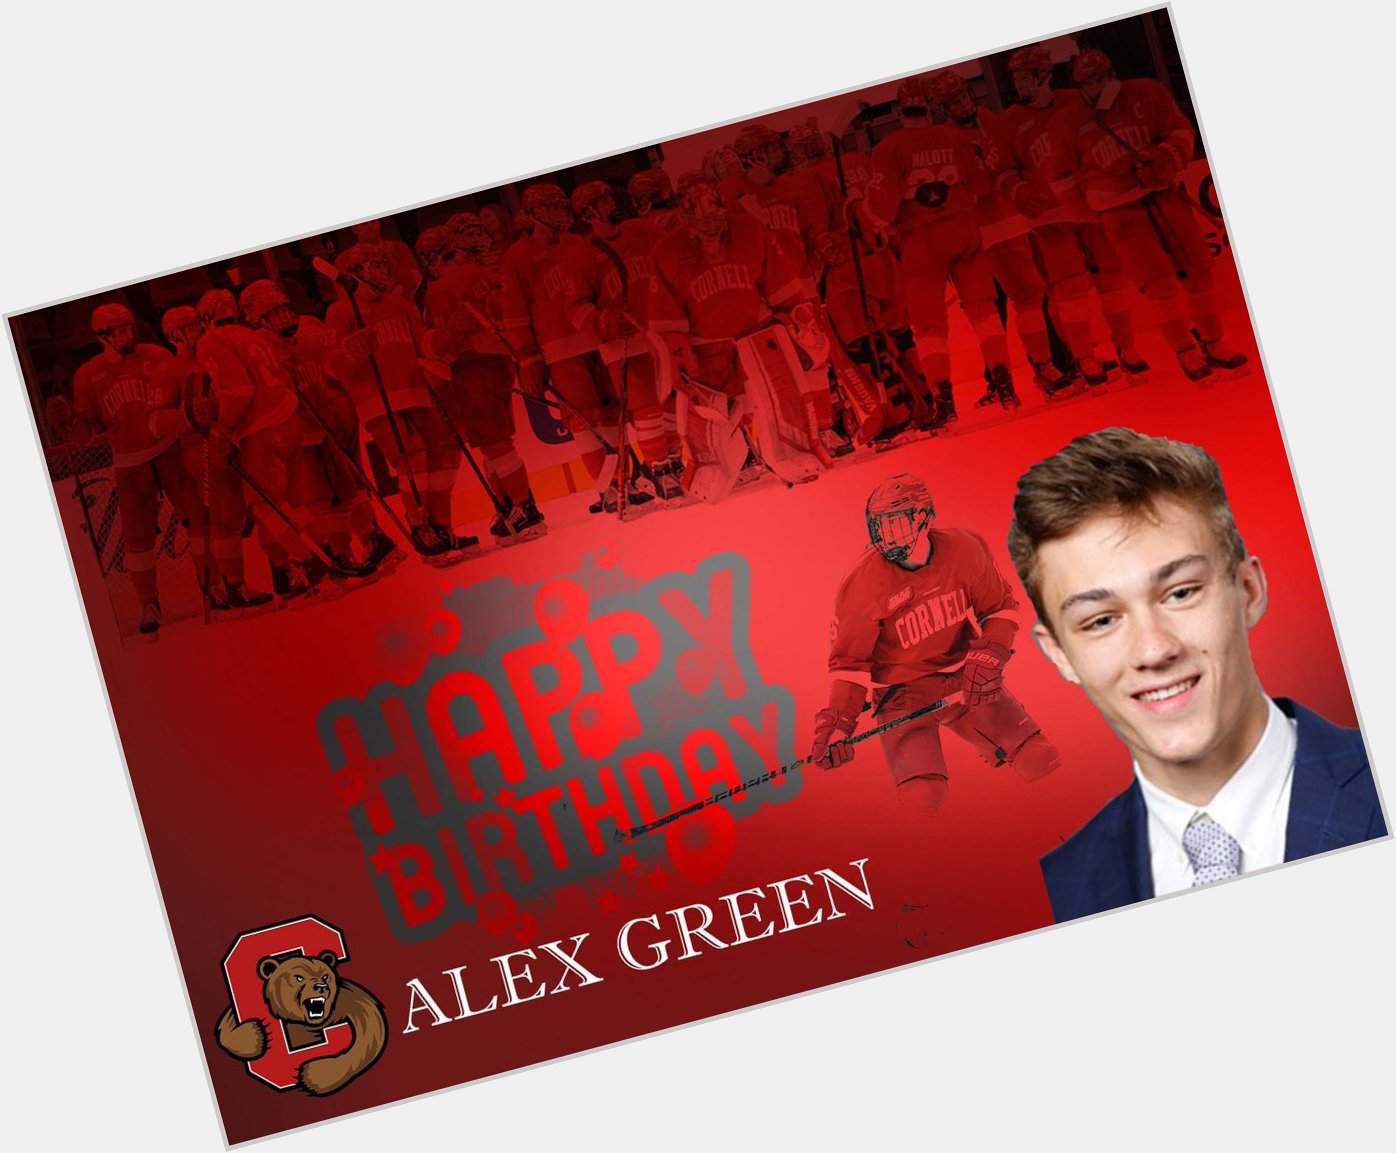 From the team Happy Birthday shout out to Alex Green.  : Ned Dykes 